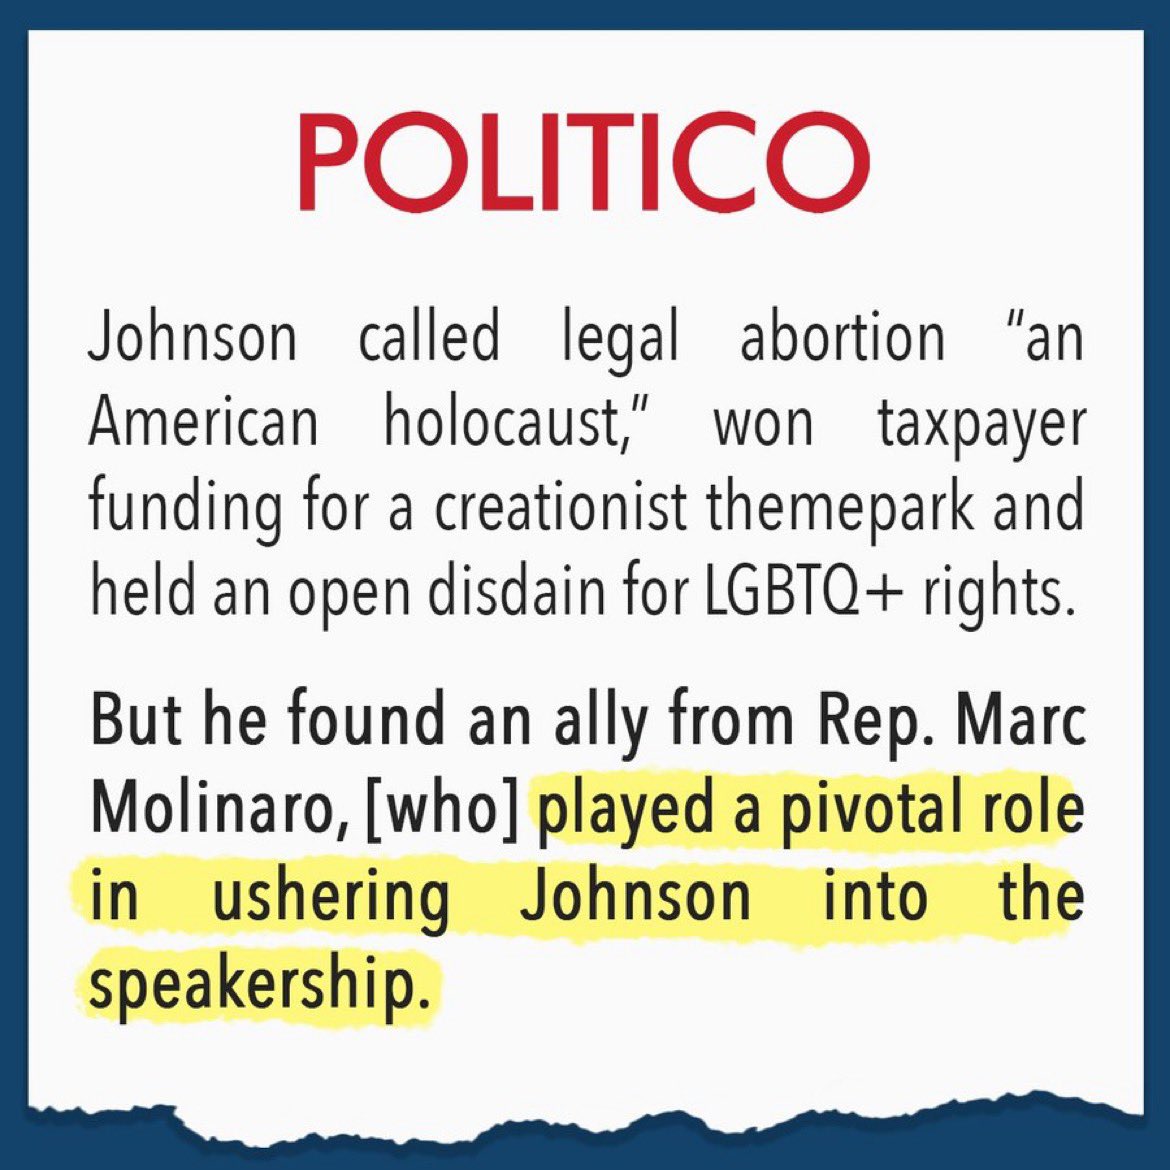 Marc Molinaro “played a pivotal role” in making an anti-abortion, anti-LGBTQ extremist Speaker of the House, and he thinks we’re too dumb to know or care. He’s wrong.